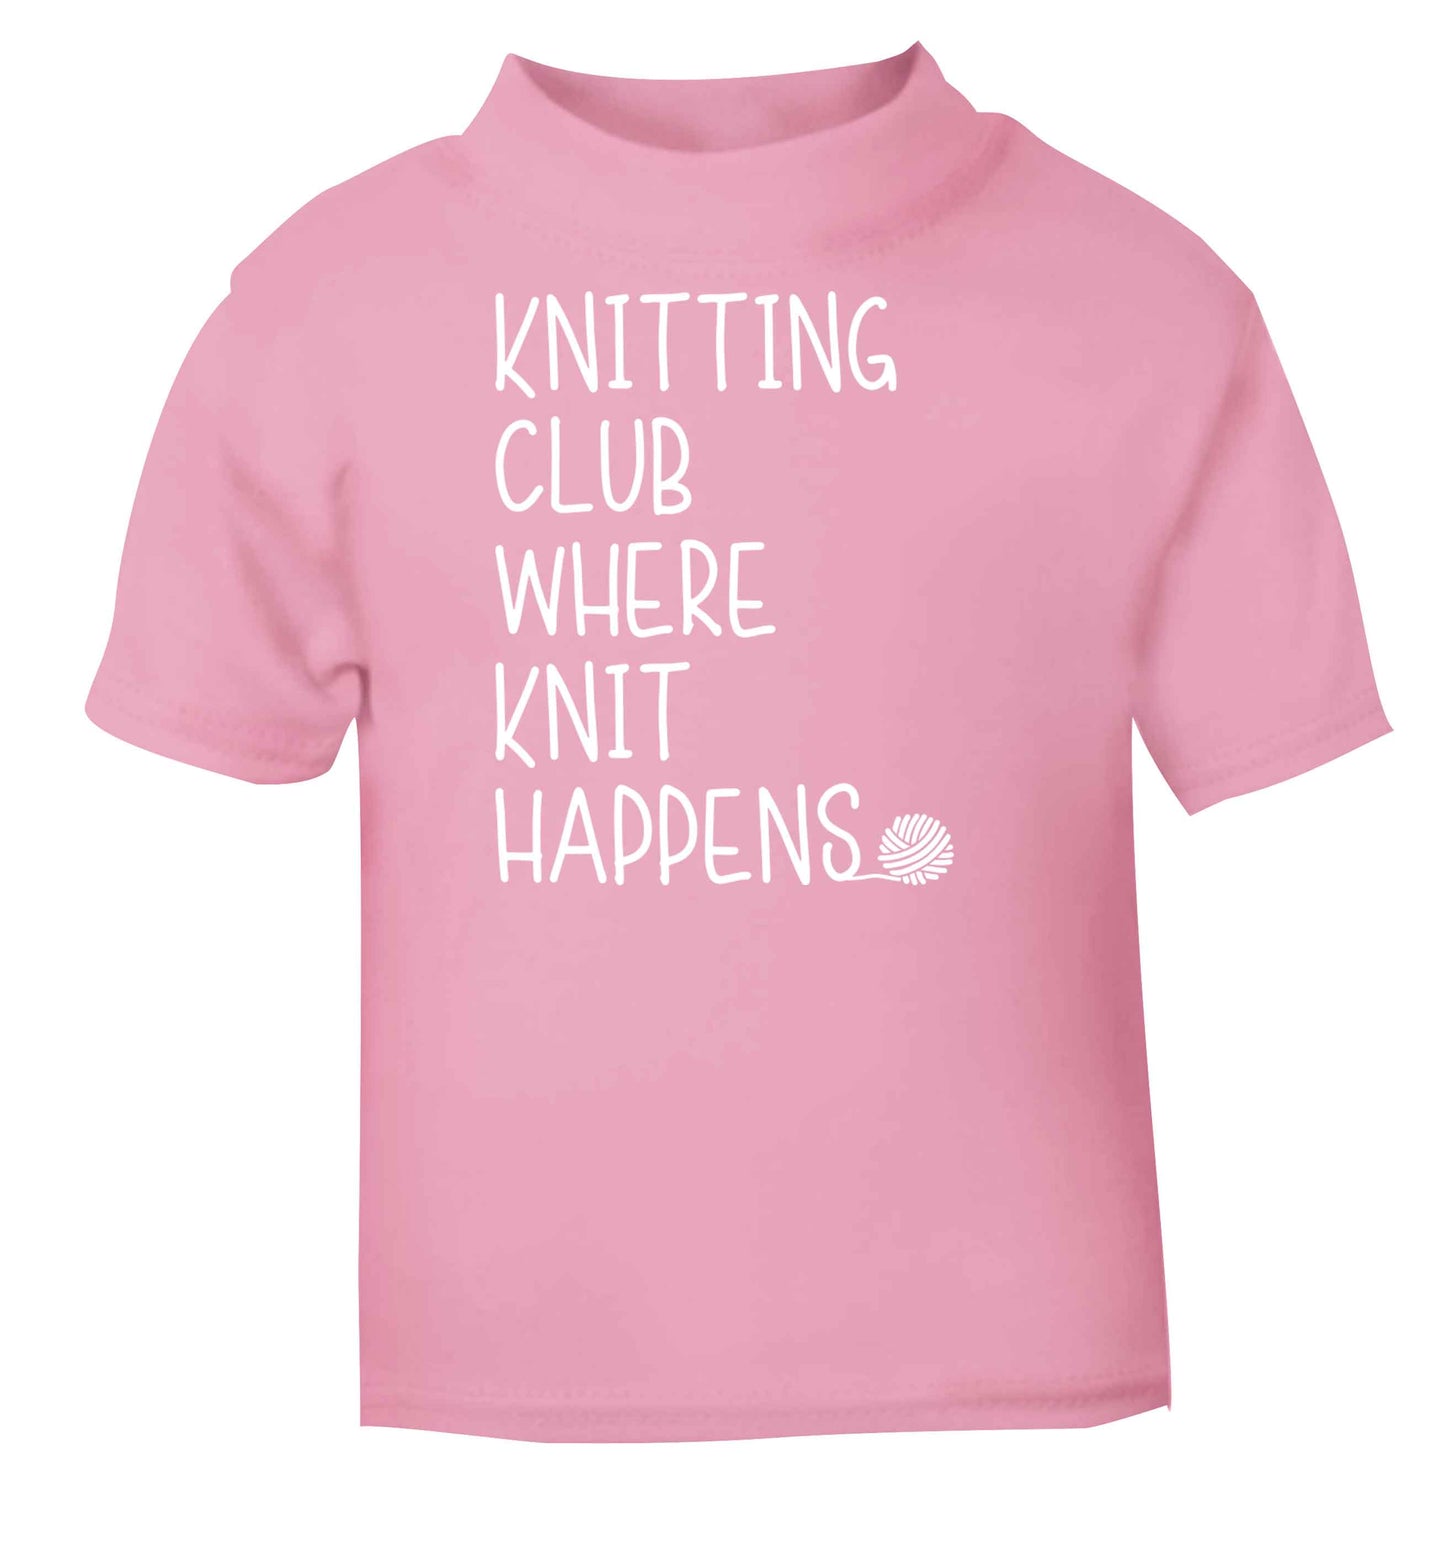 Knitting club where knit happens light pink baby toddler Tshirt 2 Years